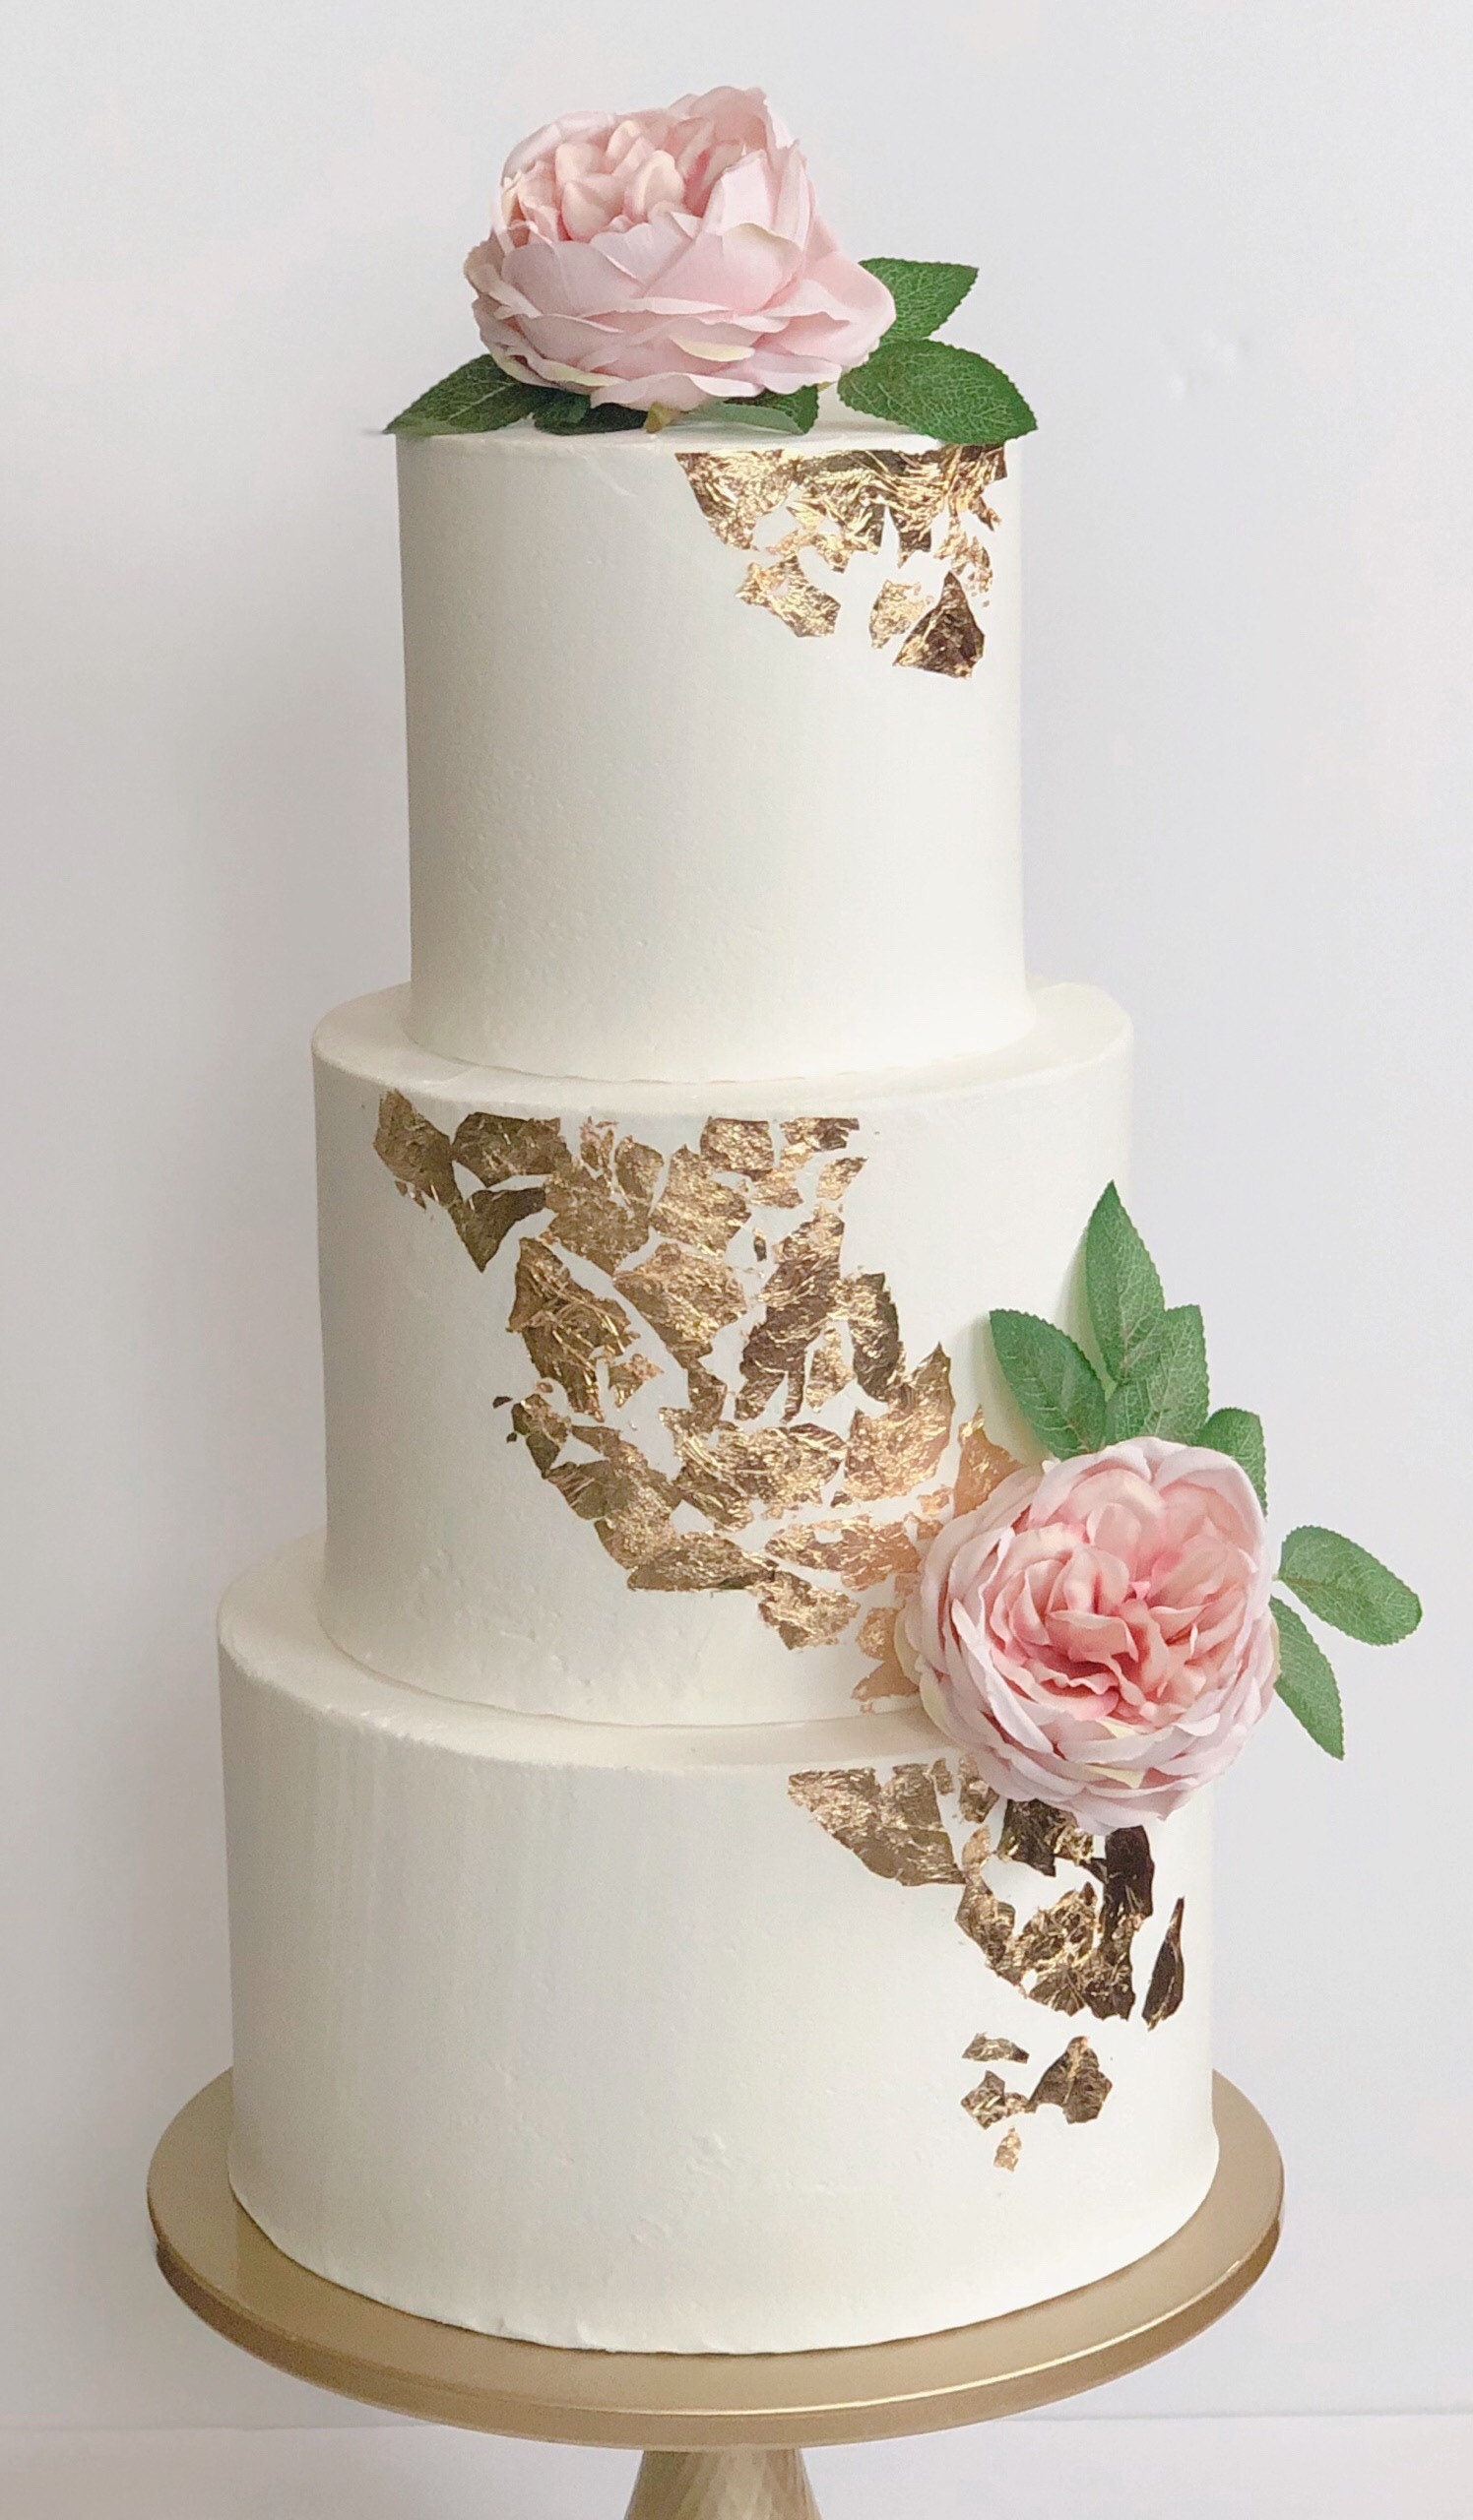 Decorating with Edible Gold Leaf ✨ will give your cakes the WOW 🤩 factor 